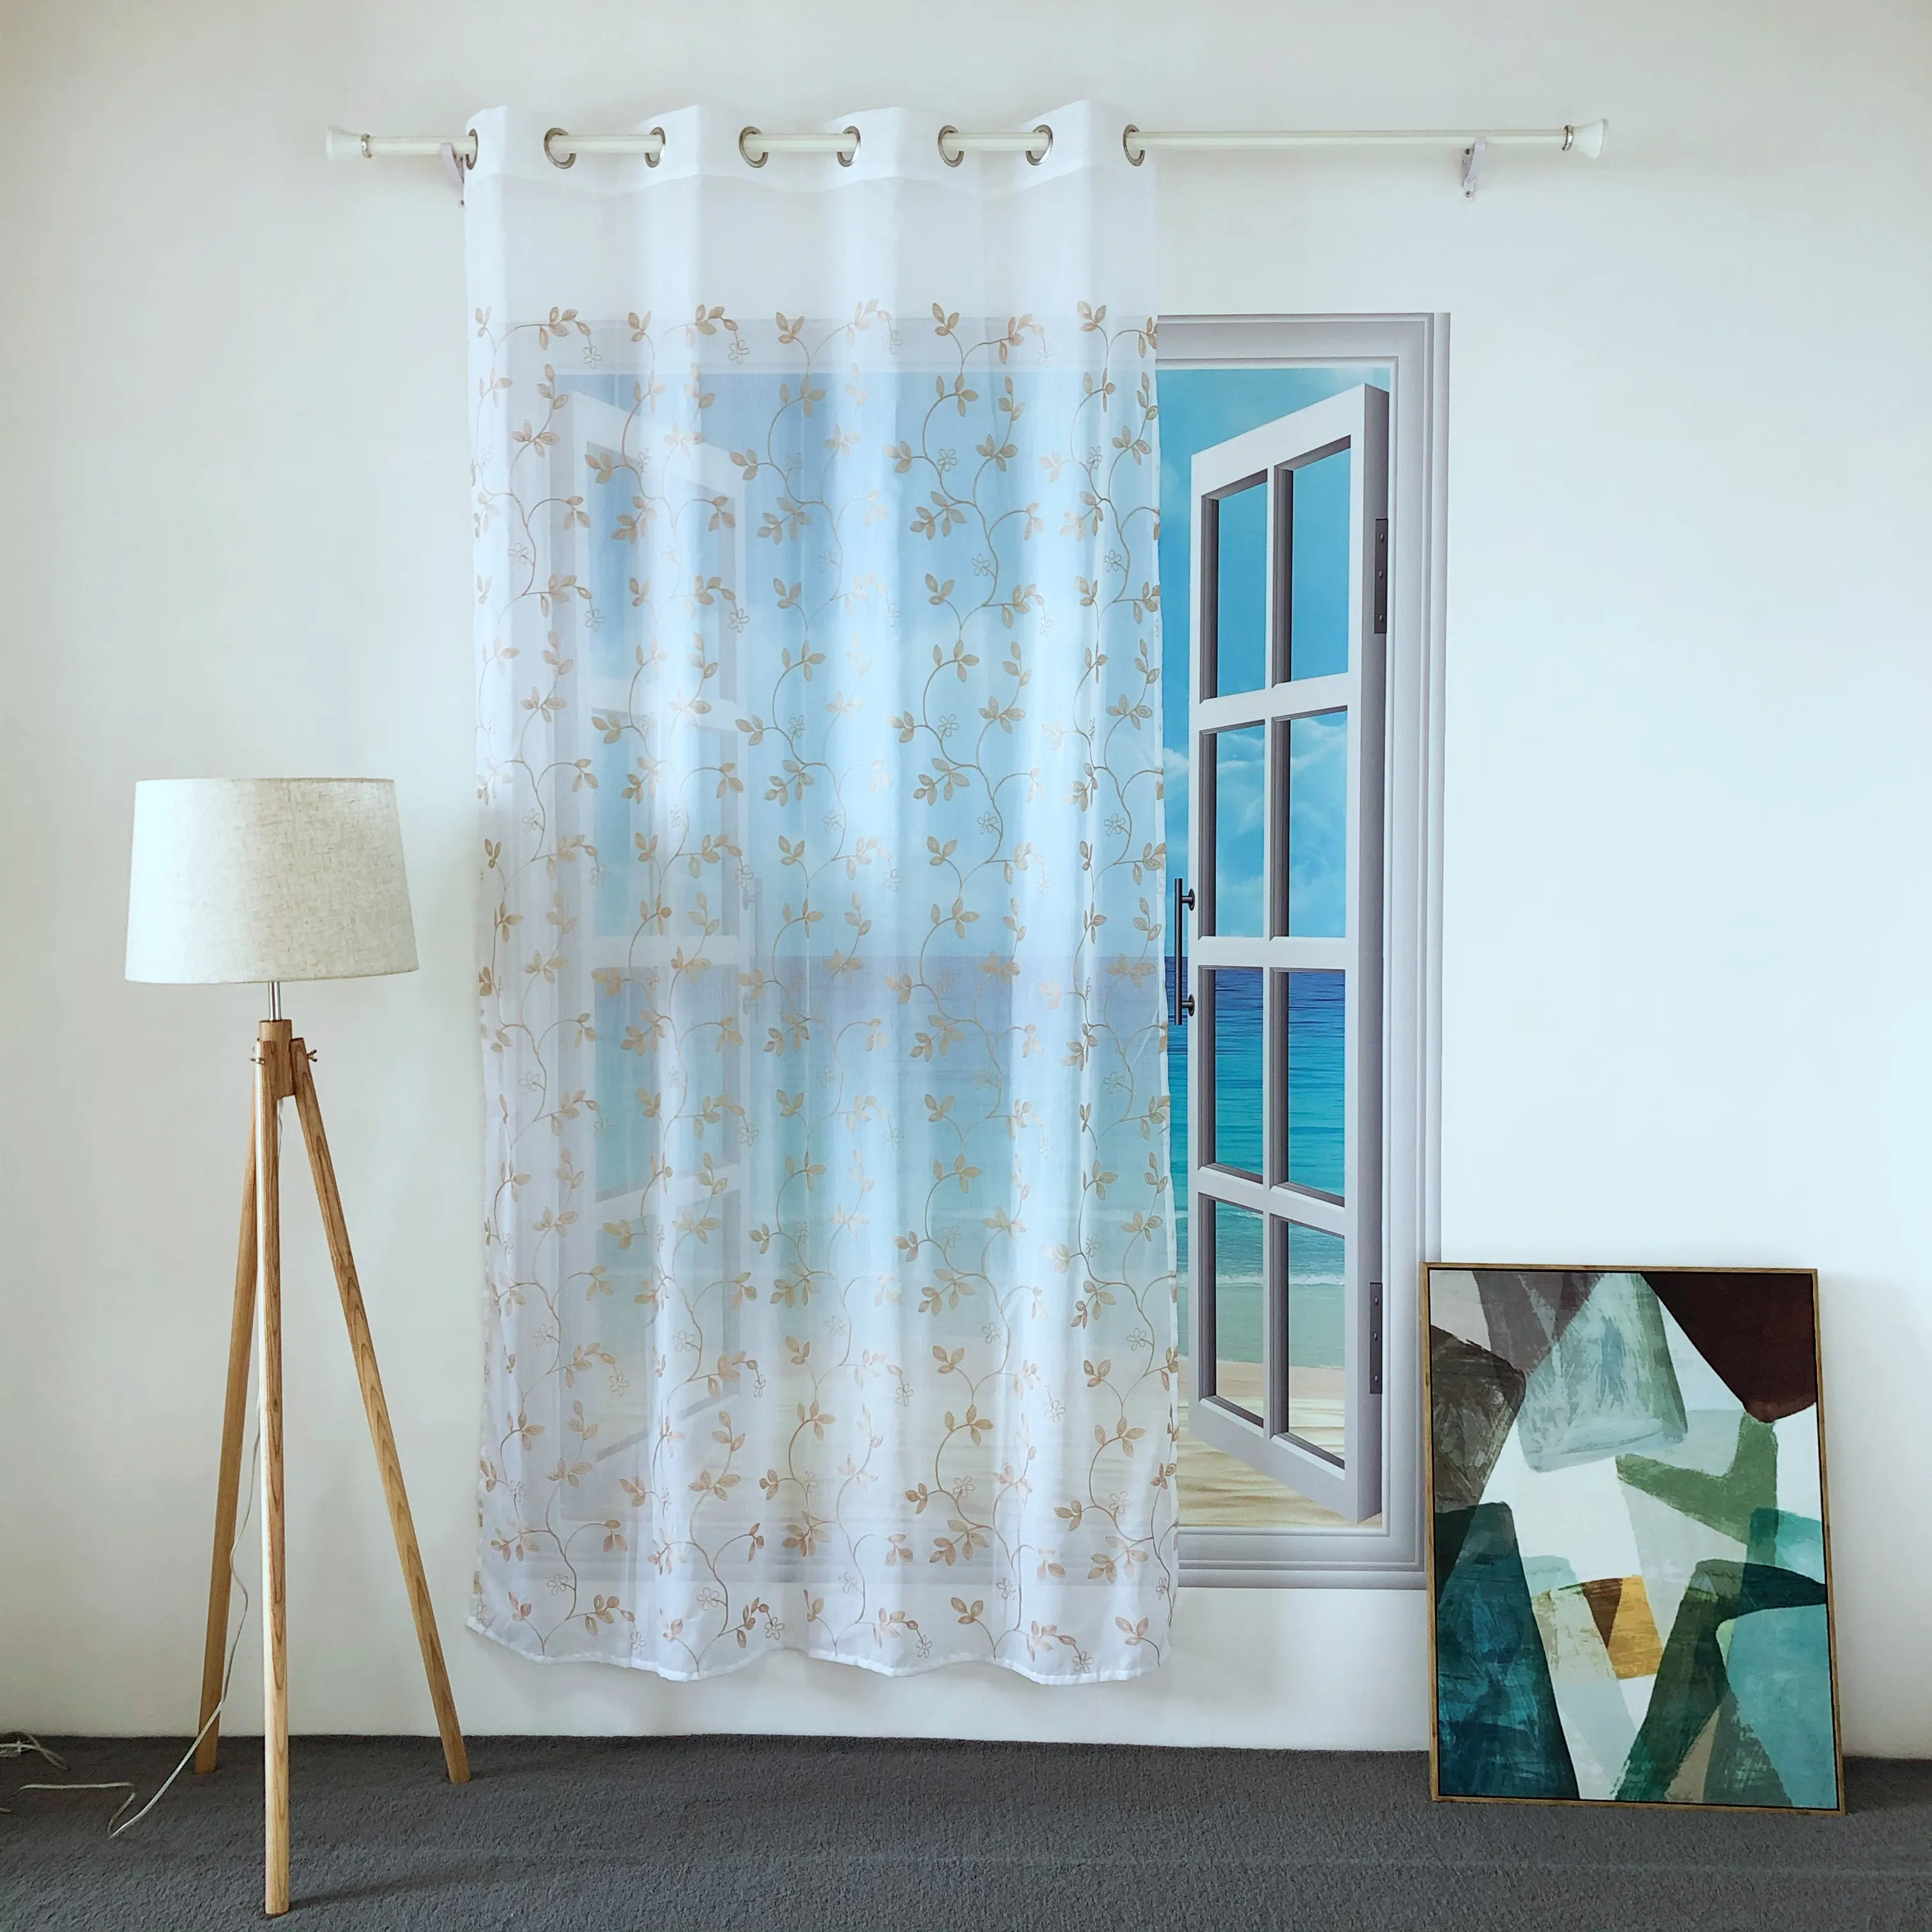 NICE DESIGN HI QUALITY FANCY ELEGANT EMBROIDERY SHEER PANEL CURTAIN FOR LIVING ROOM AND HOTEL EMD-41 VOILE